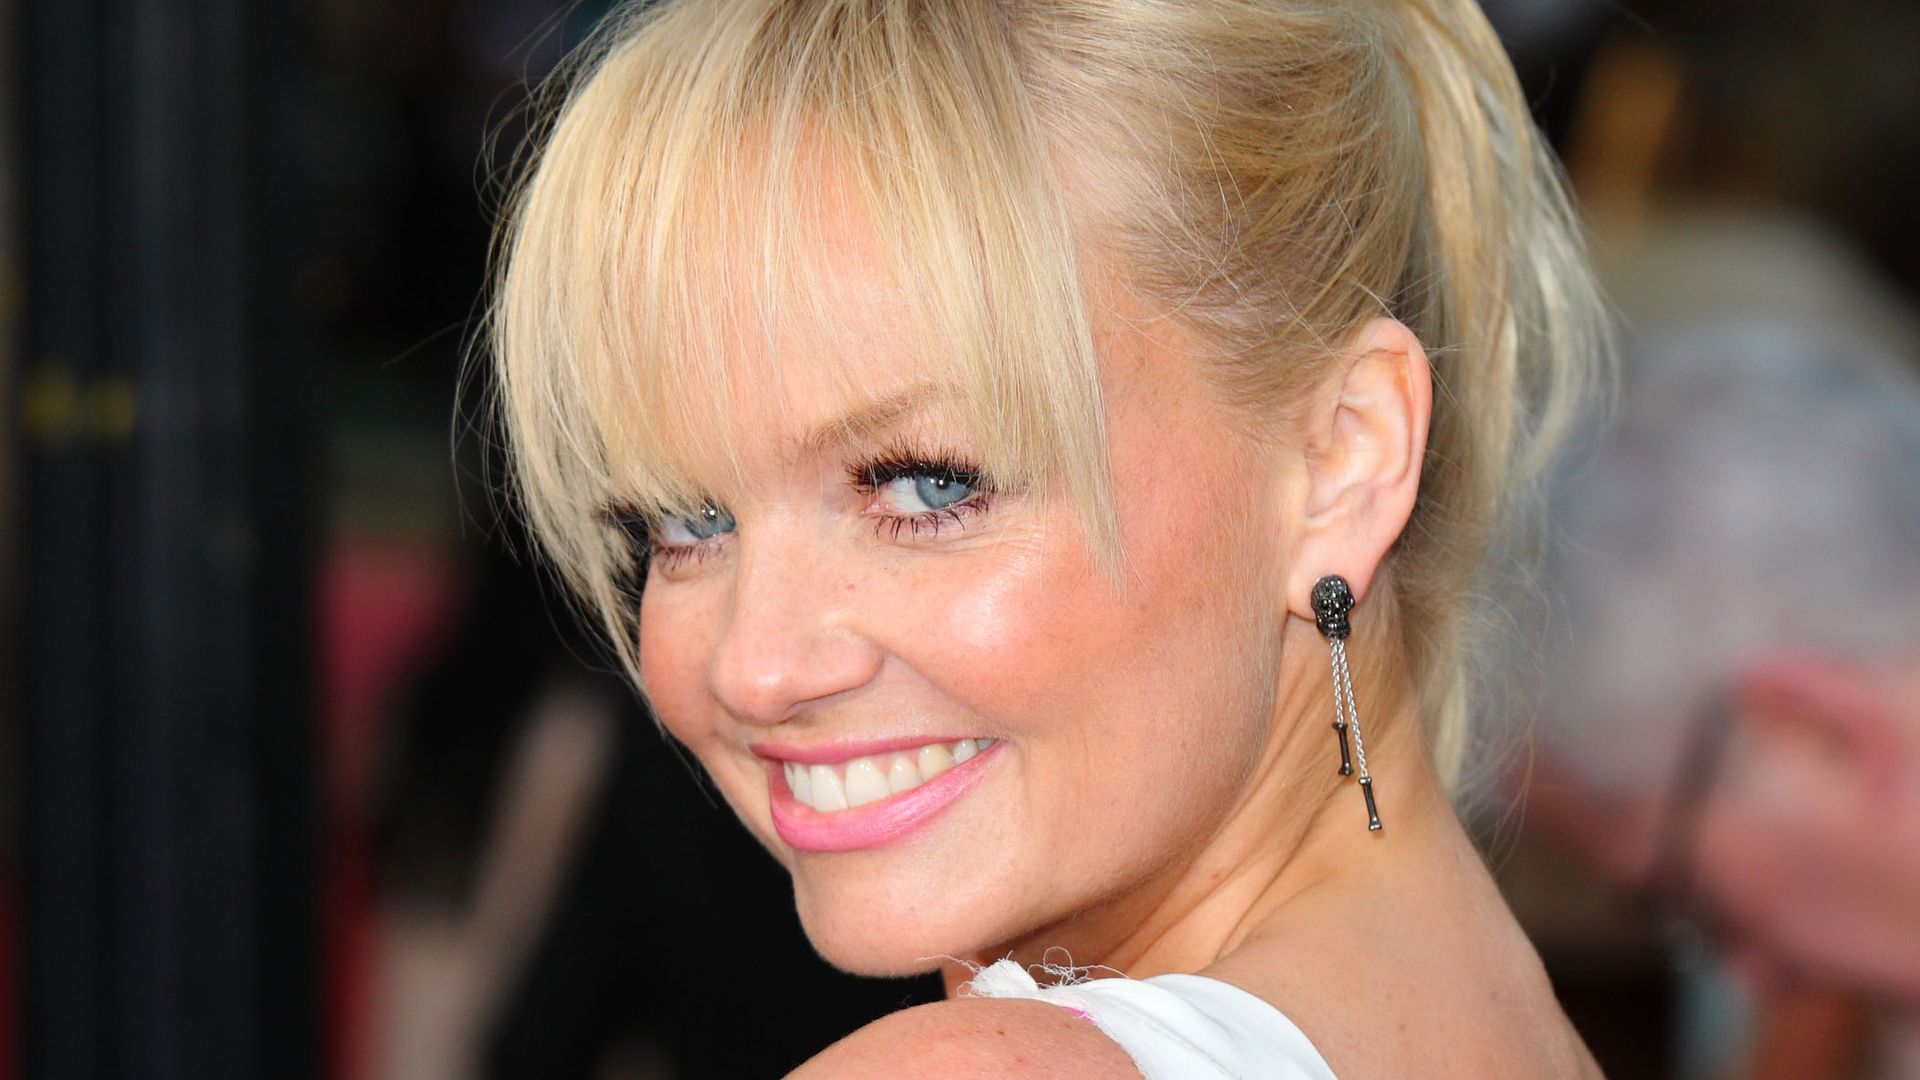 Emma Bunton looking over her shoulder in a white dress at the UK premiere of "Sex And The City 2" in 2010 